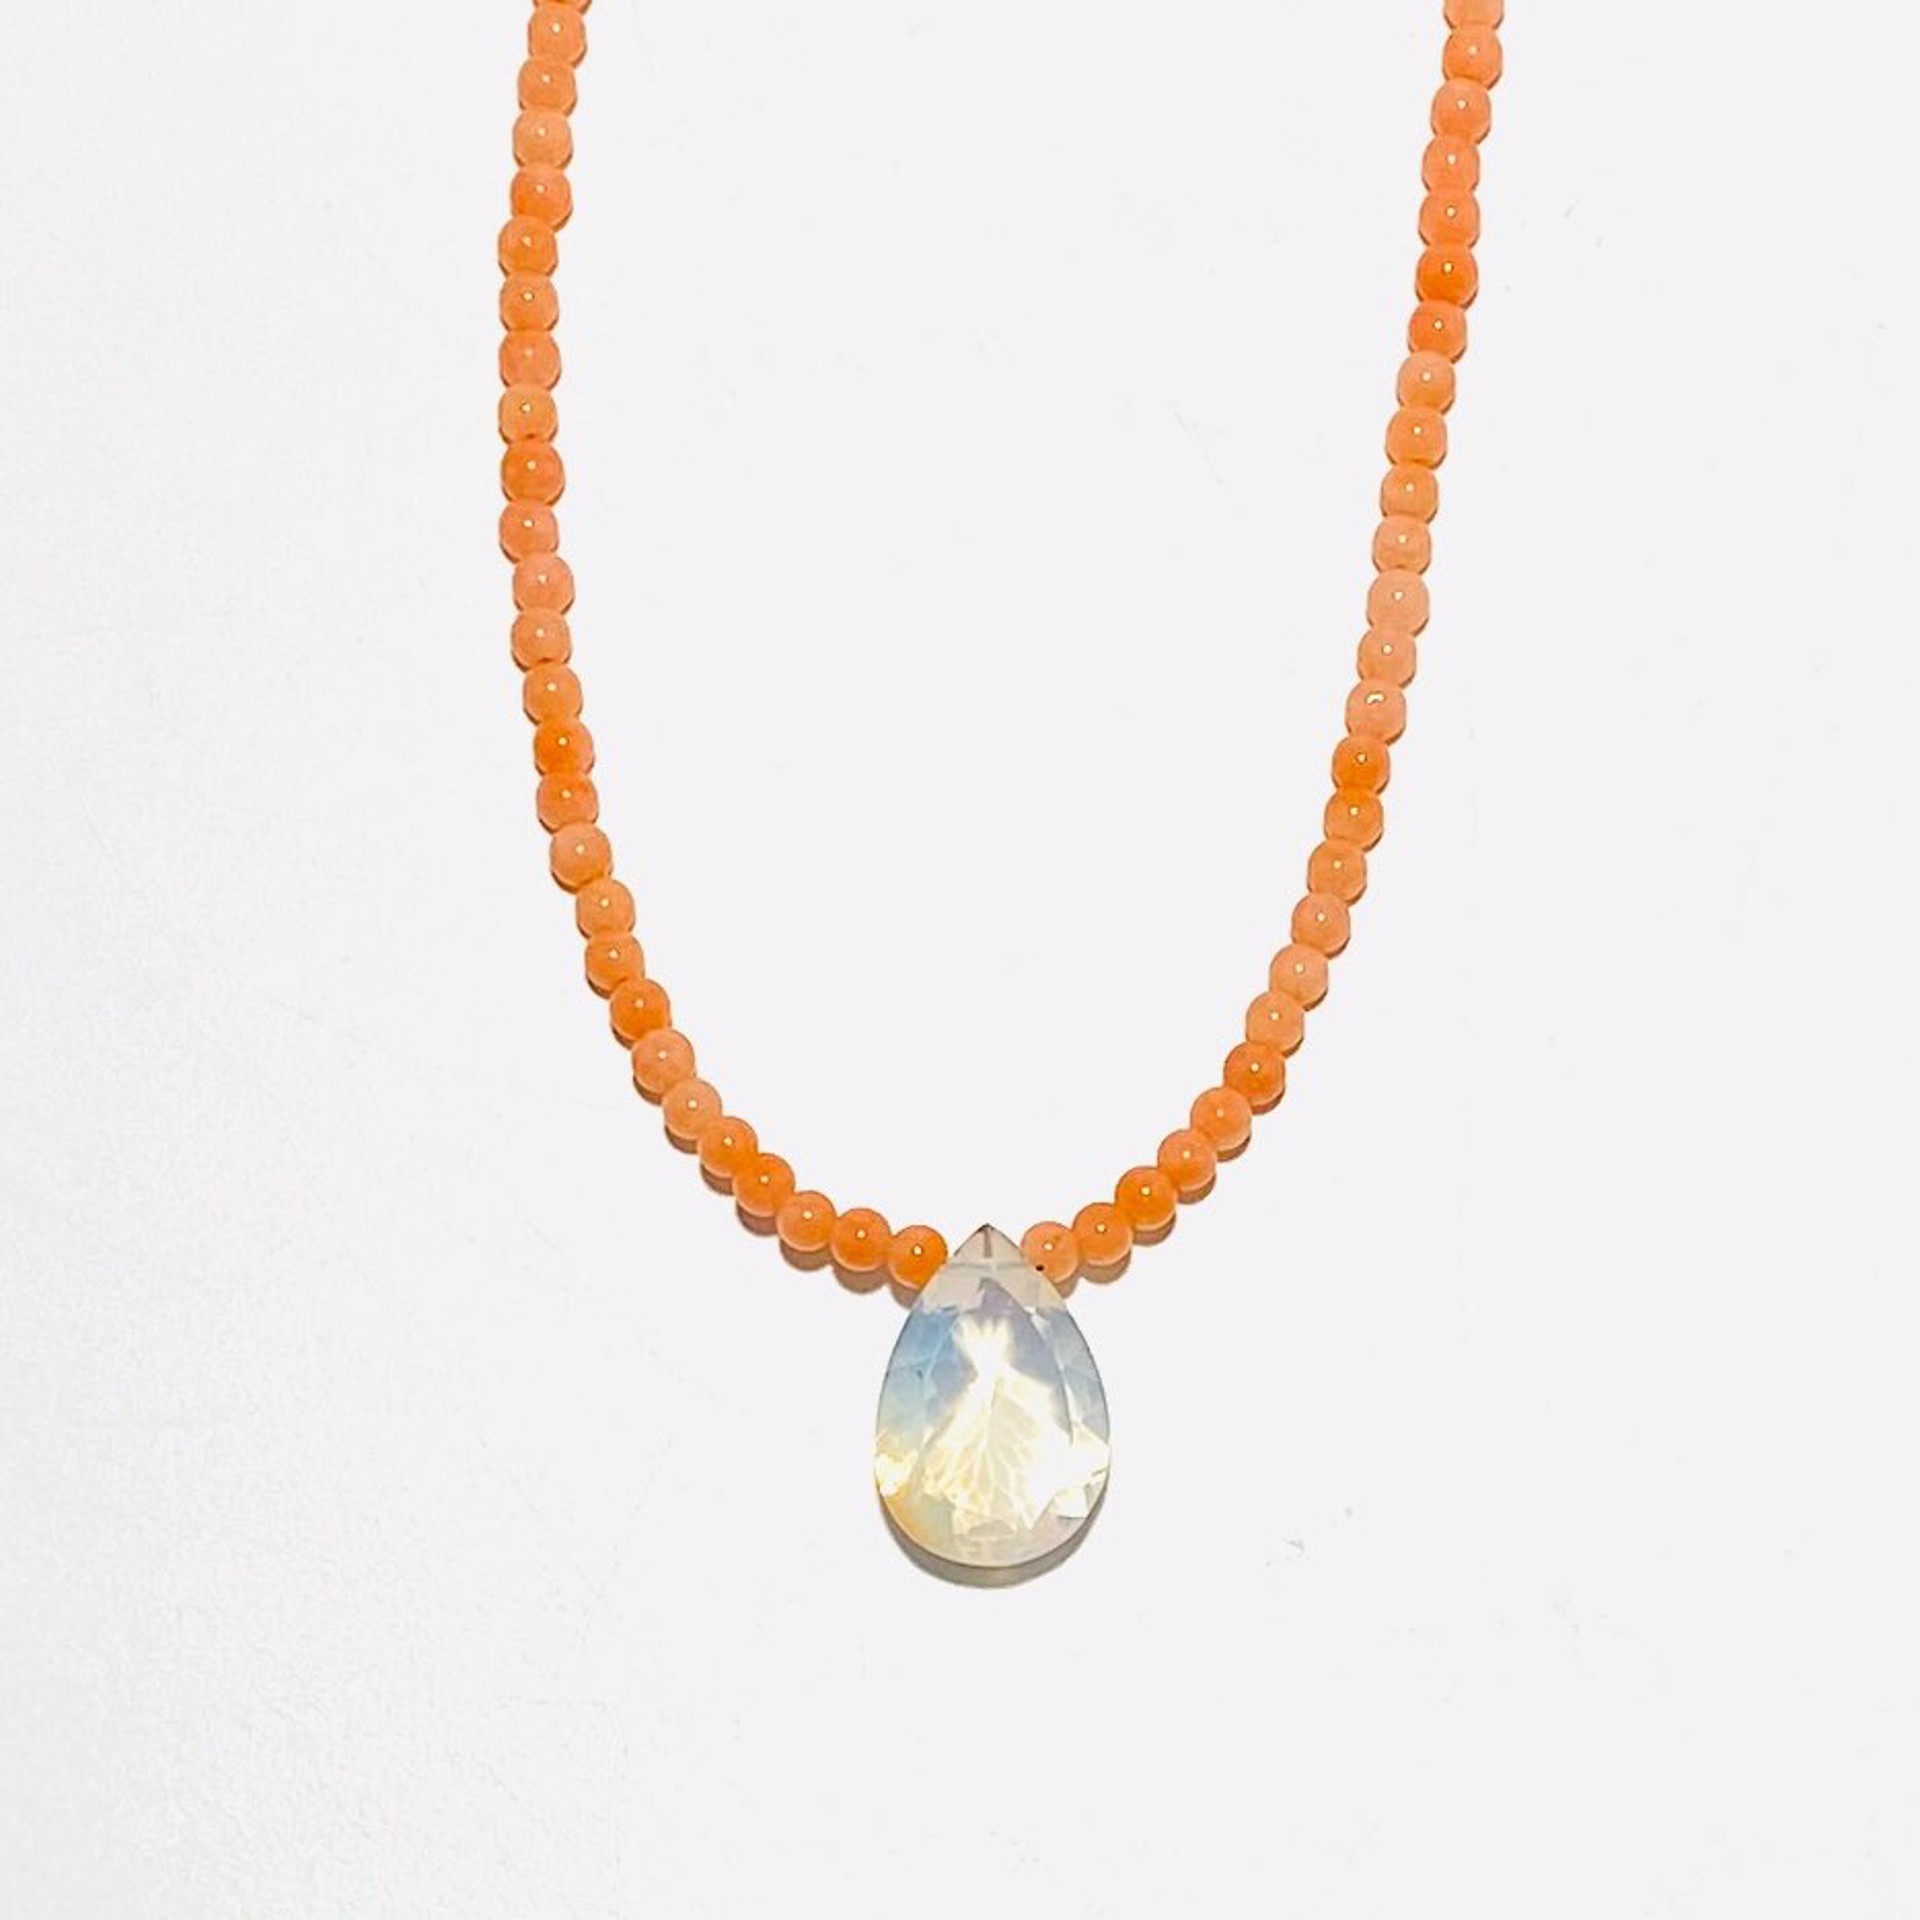 Tiny Coral Bead, Large Faceted Fire Opal Necklace NT23-85 by Nance Trueworthy